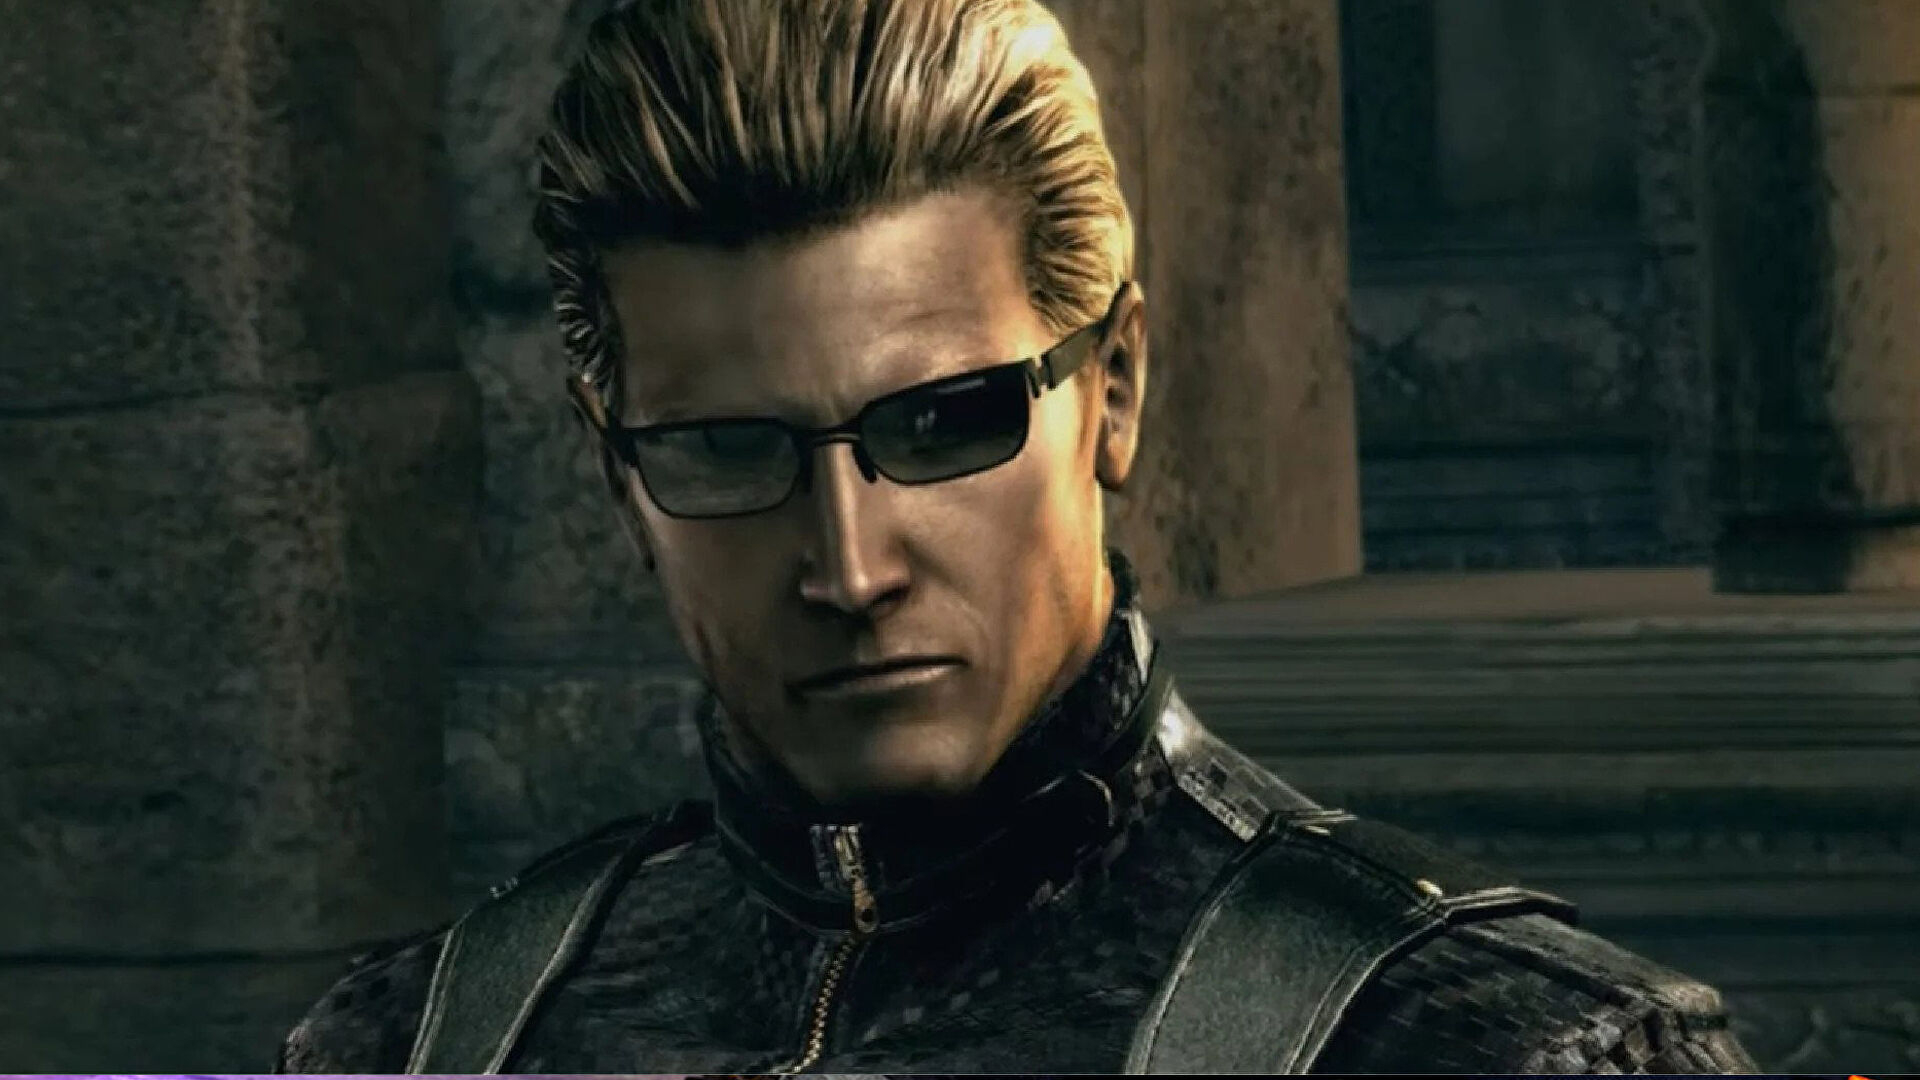 1920x1080 Dead by Daylight leak points to Resident Evil's Albert Wesker joining the game